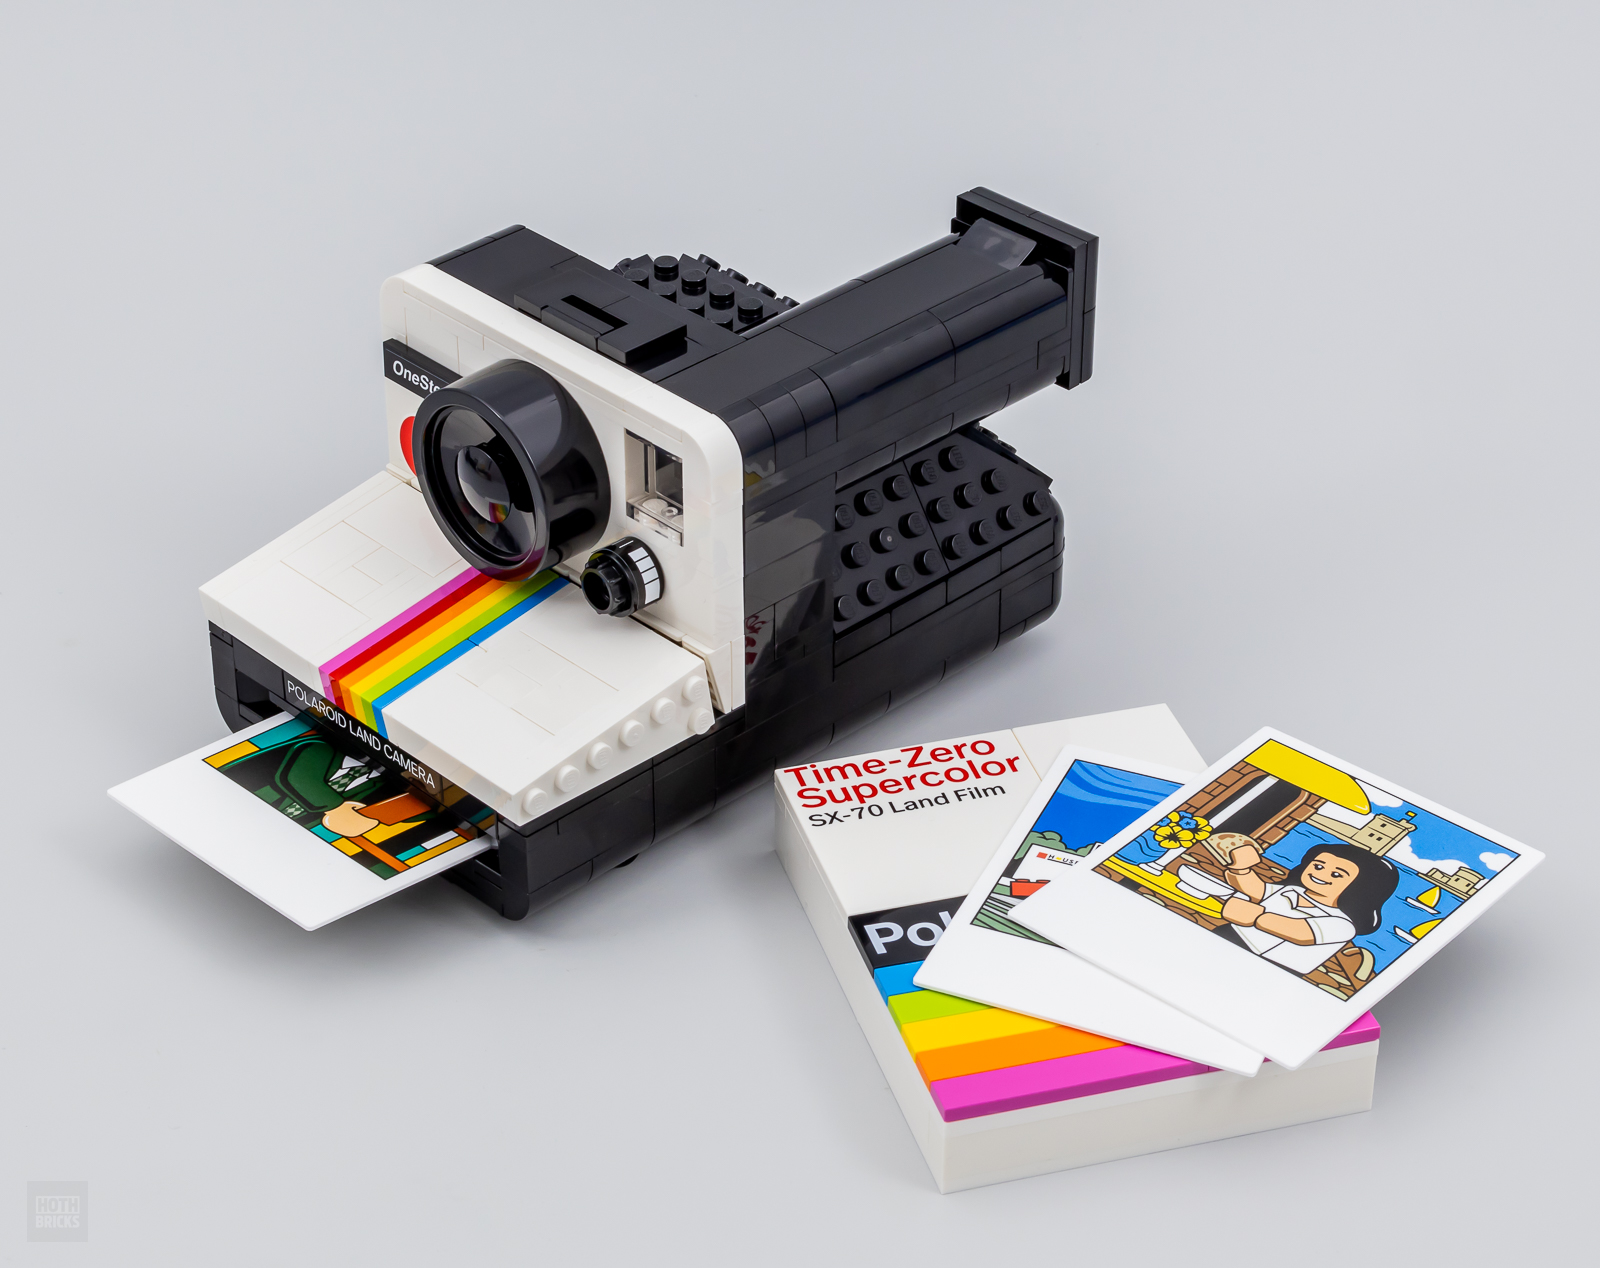 The Polaroid OneStep SX-70 is getting the Lego treatment - Acquire